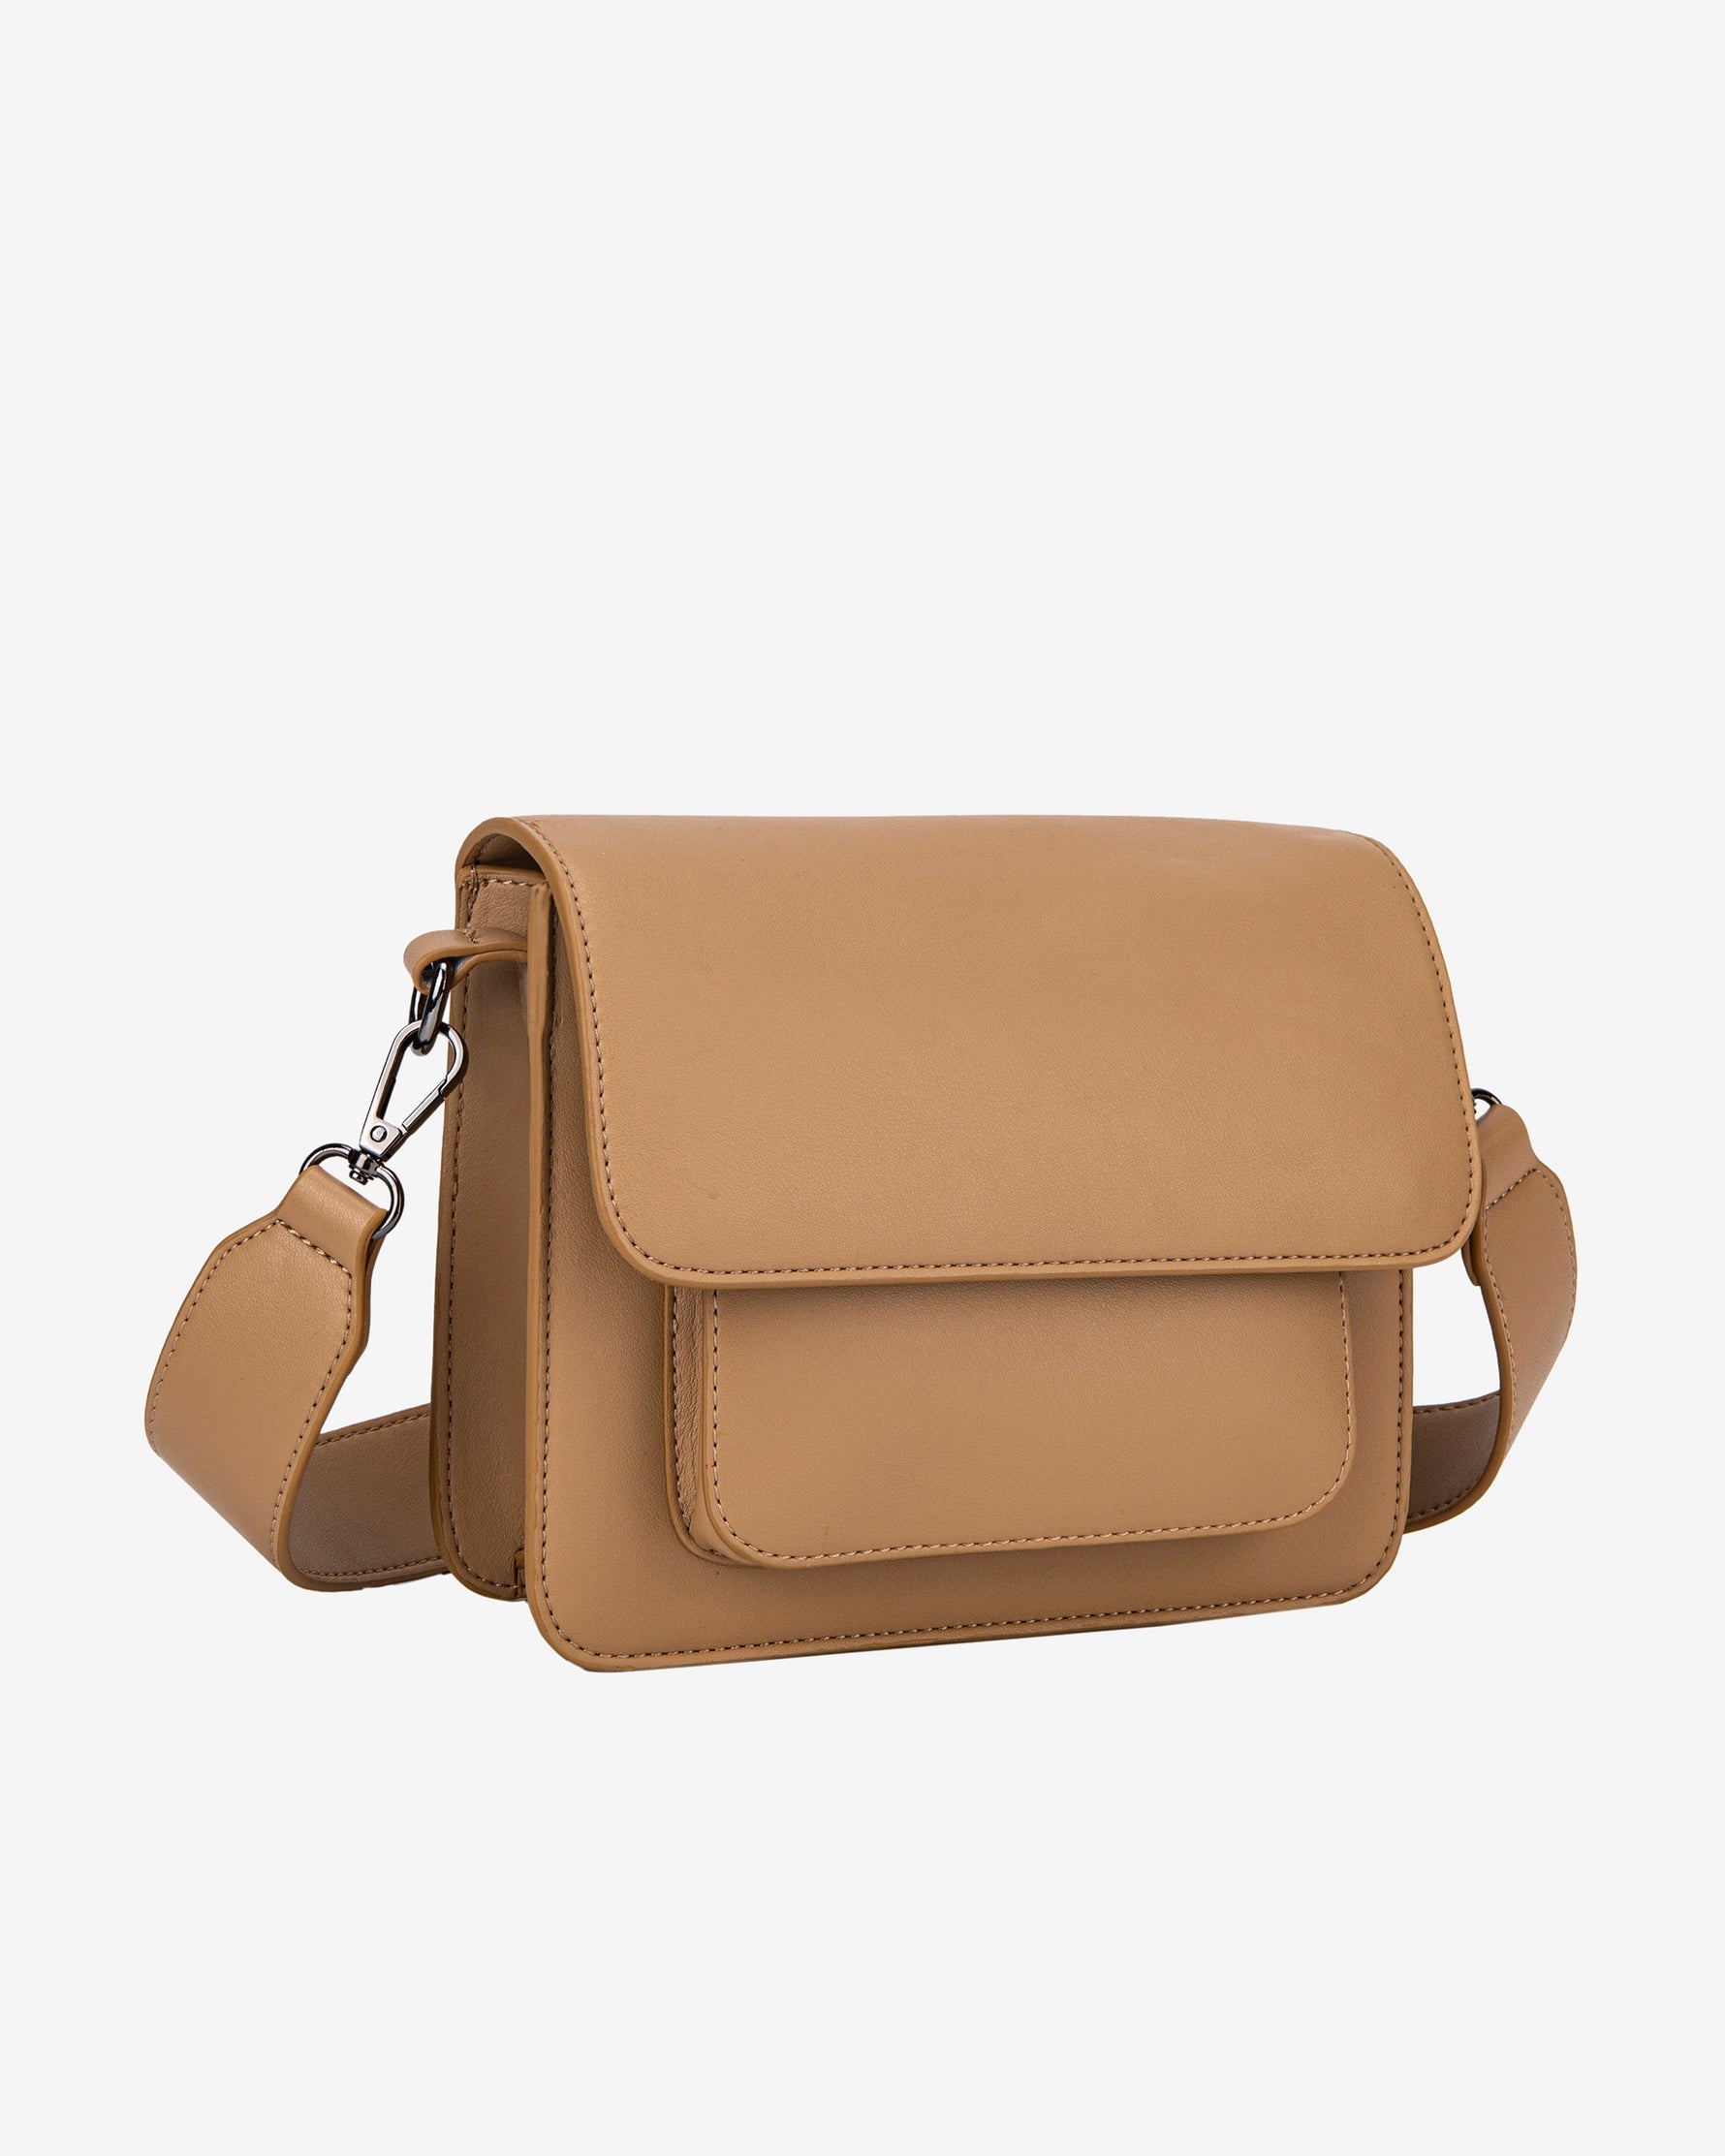 Cayman Tan Brown Pocket Soft Structure